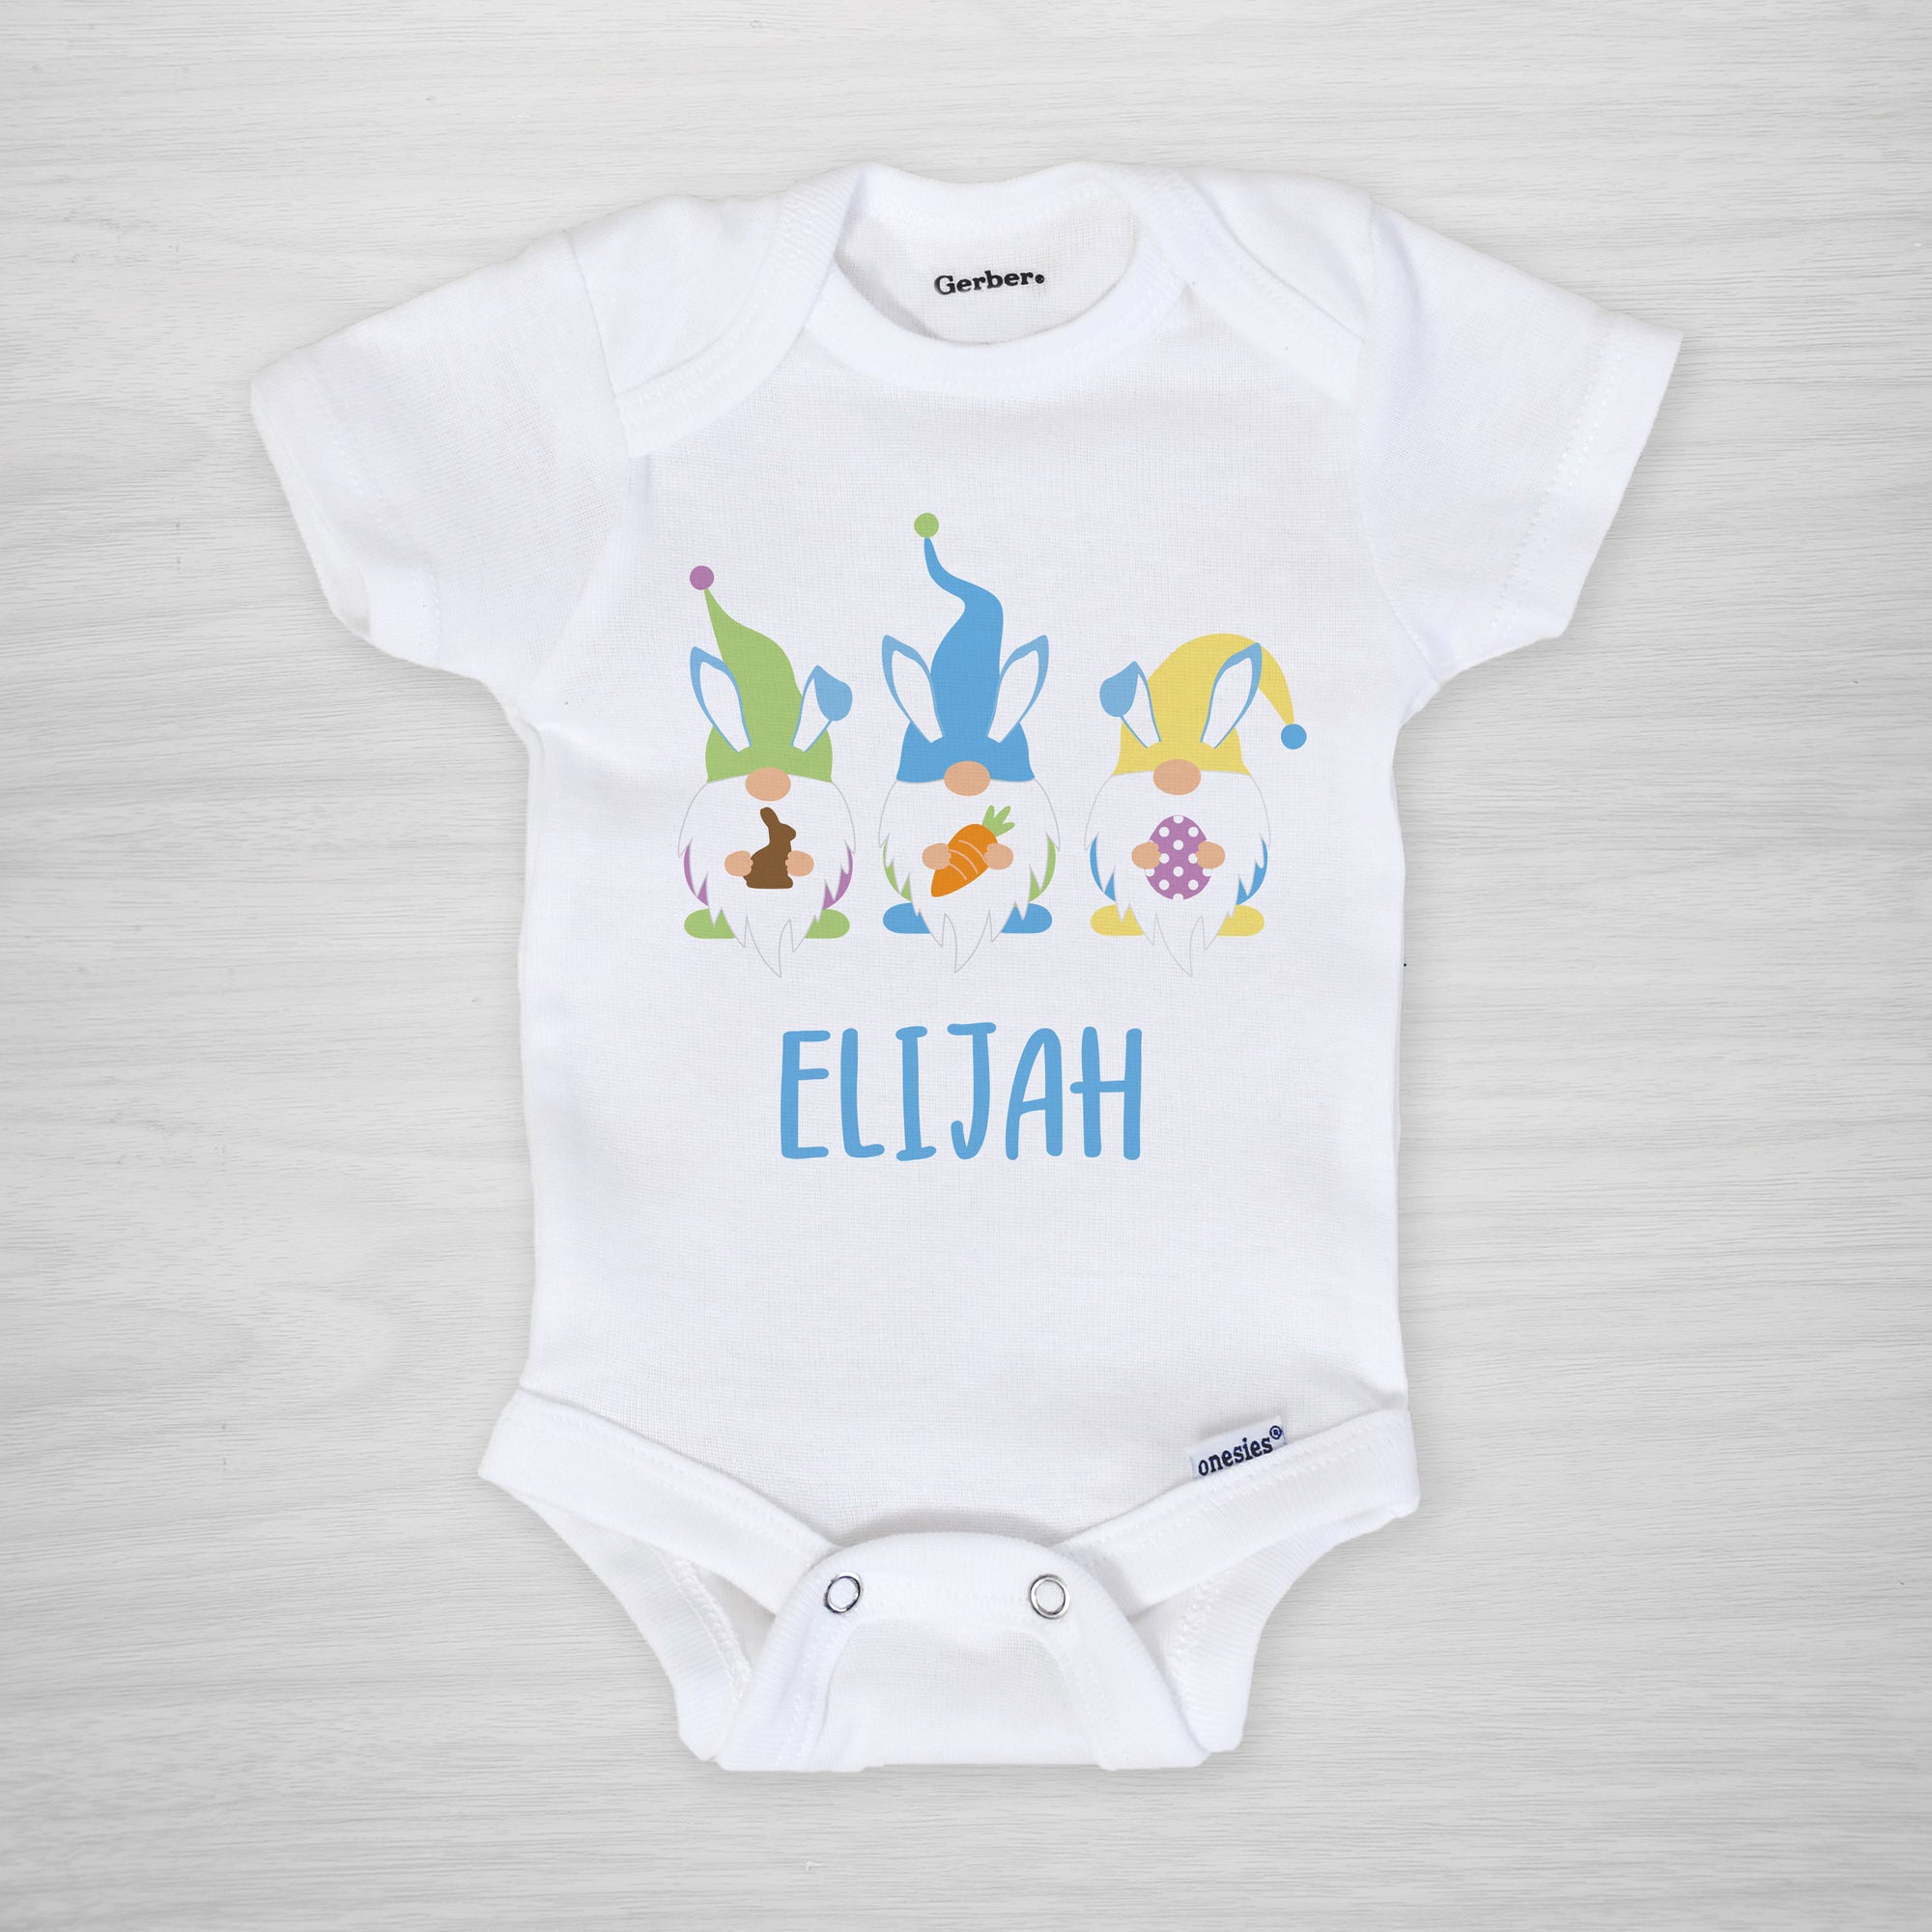 Easter gnome personalized onesie, with bunny ear gnomes and sweet Easter treats, long sleeved